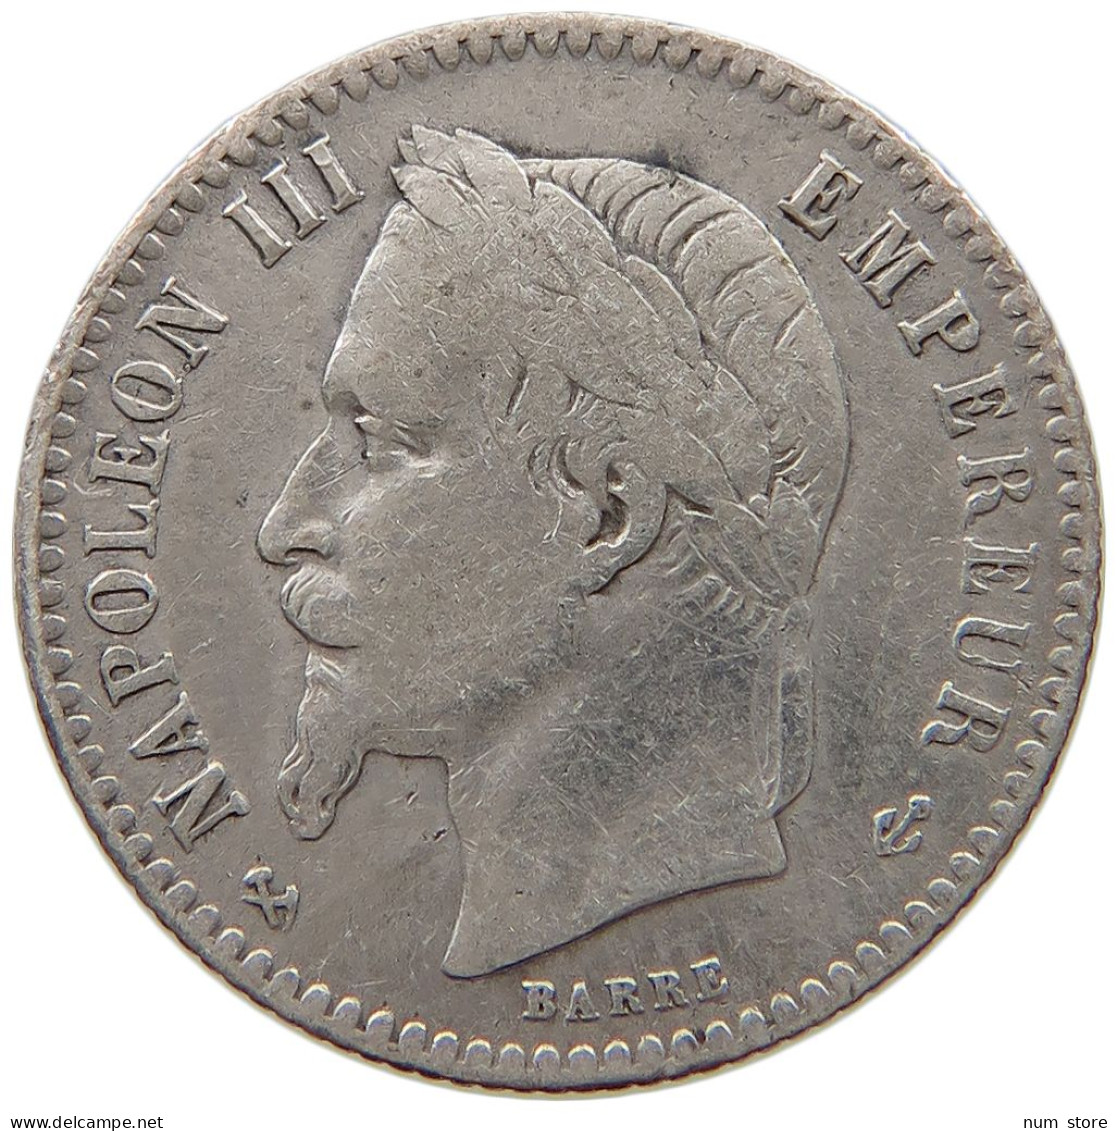 FRANCE 50 CENTIMES 1865 K Napoleon III. (1852-1870) #a004 0075 - 50 Centimes